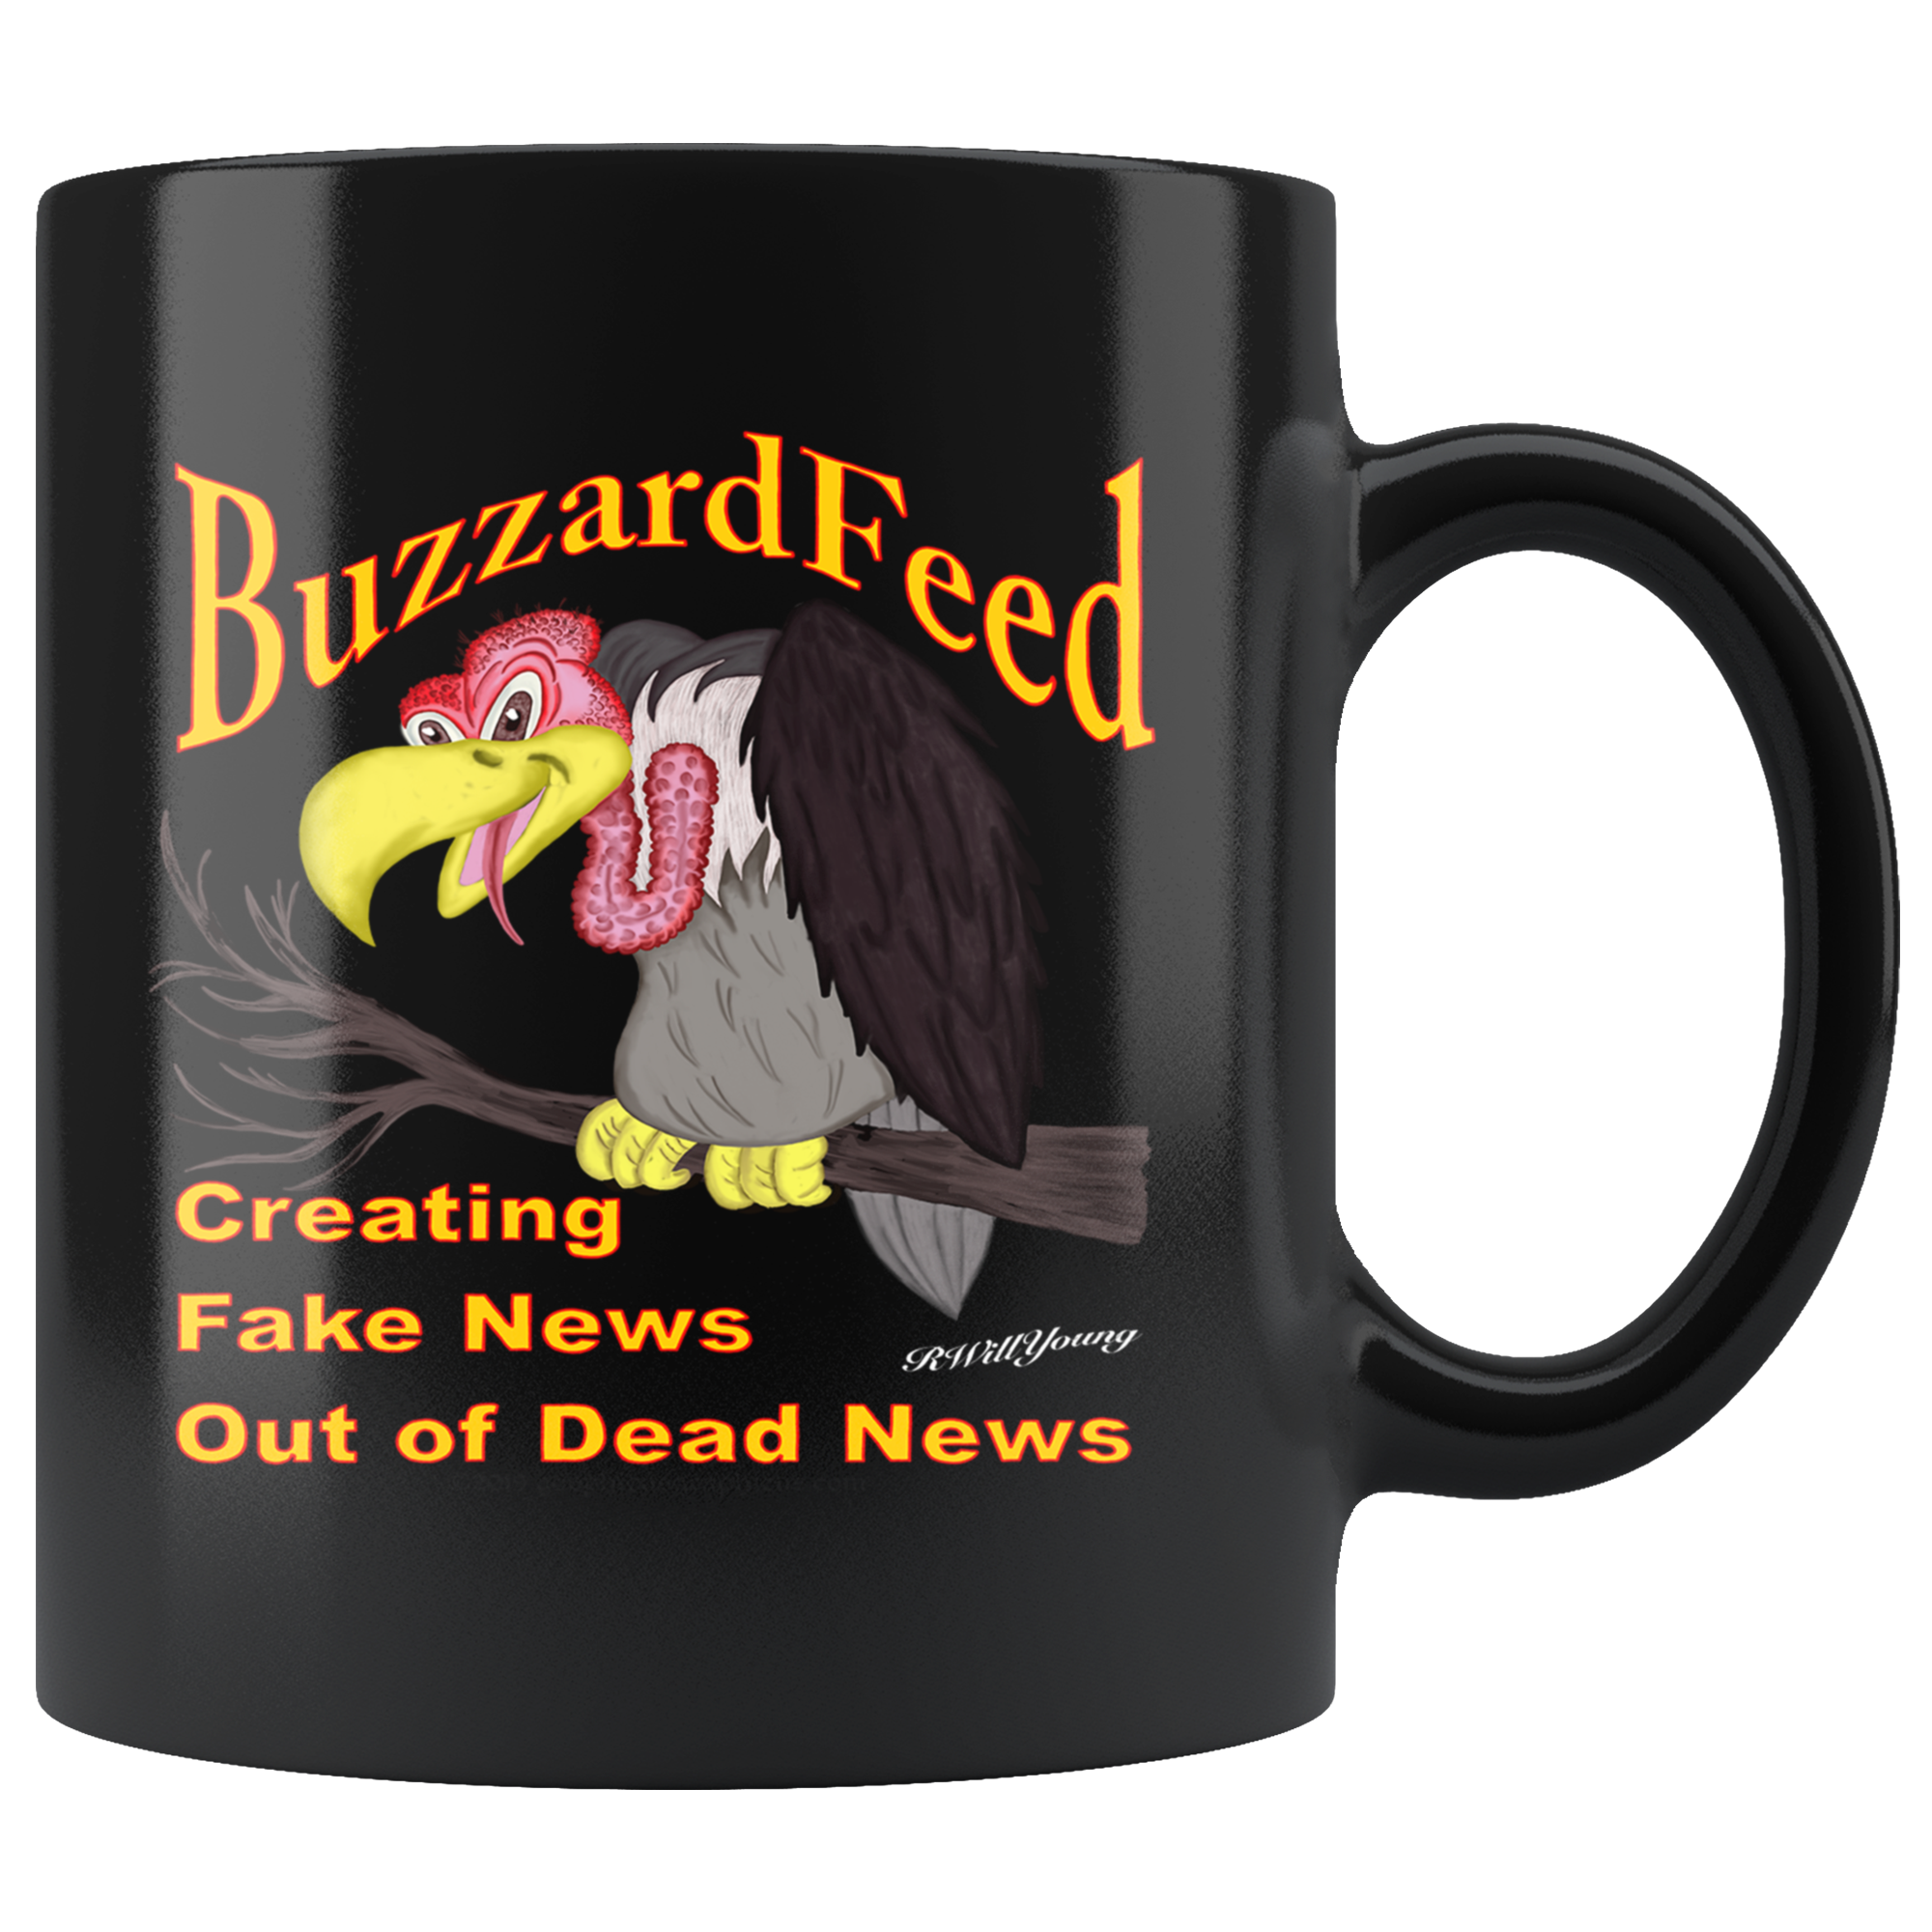 BUZZARDFEED... CREATING FAKE NEWS OUT OF DEAD NEWS